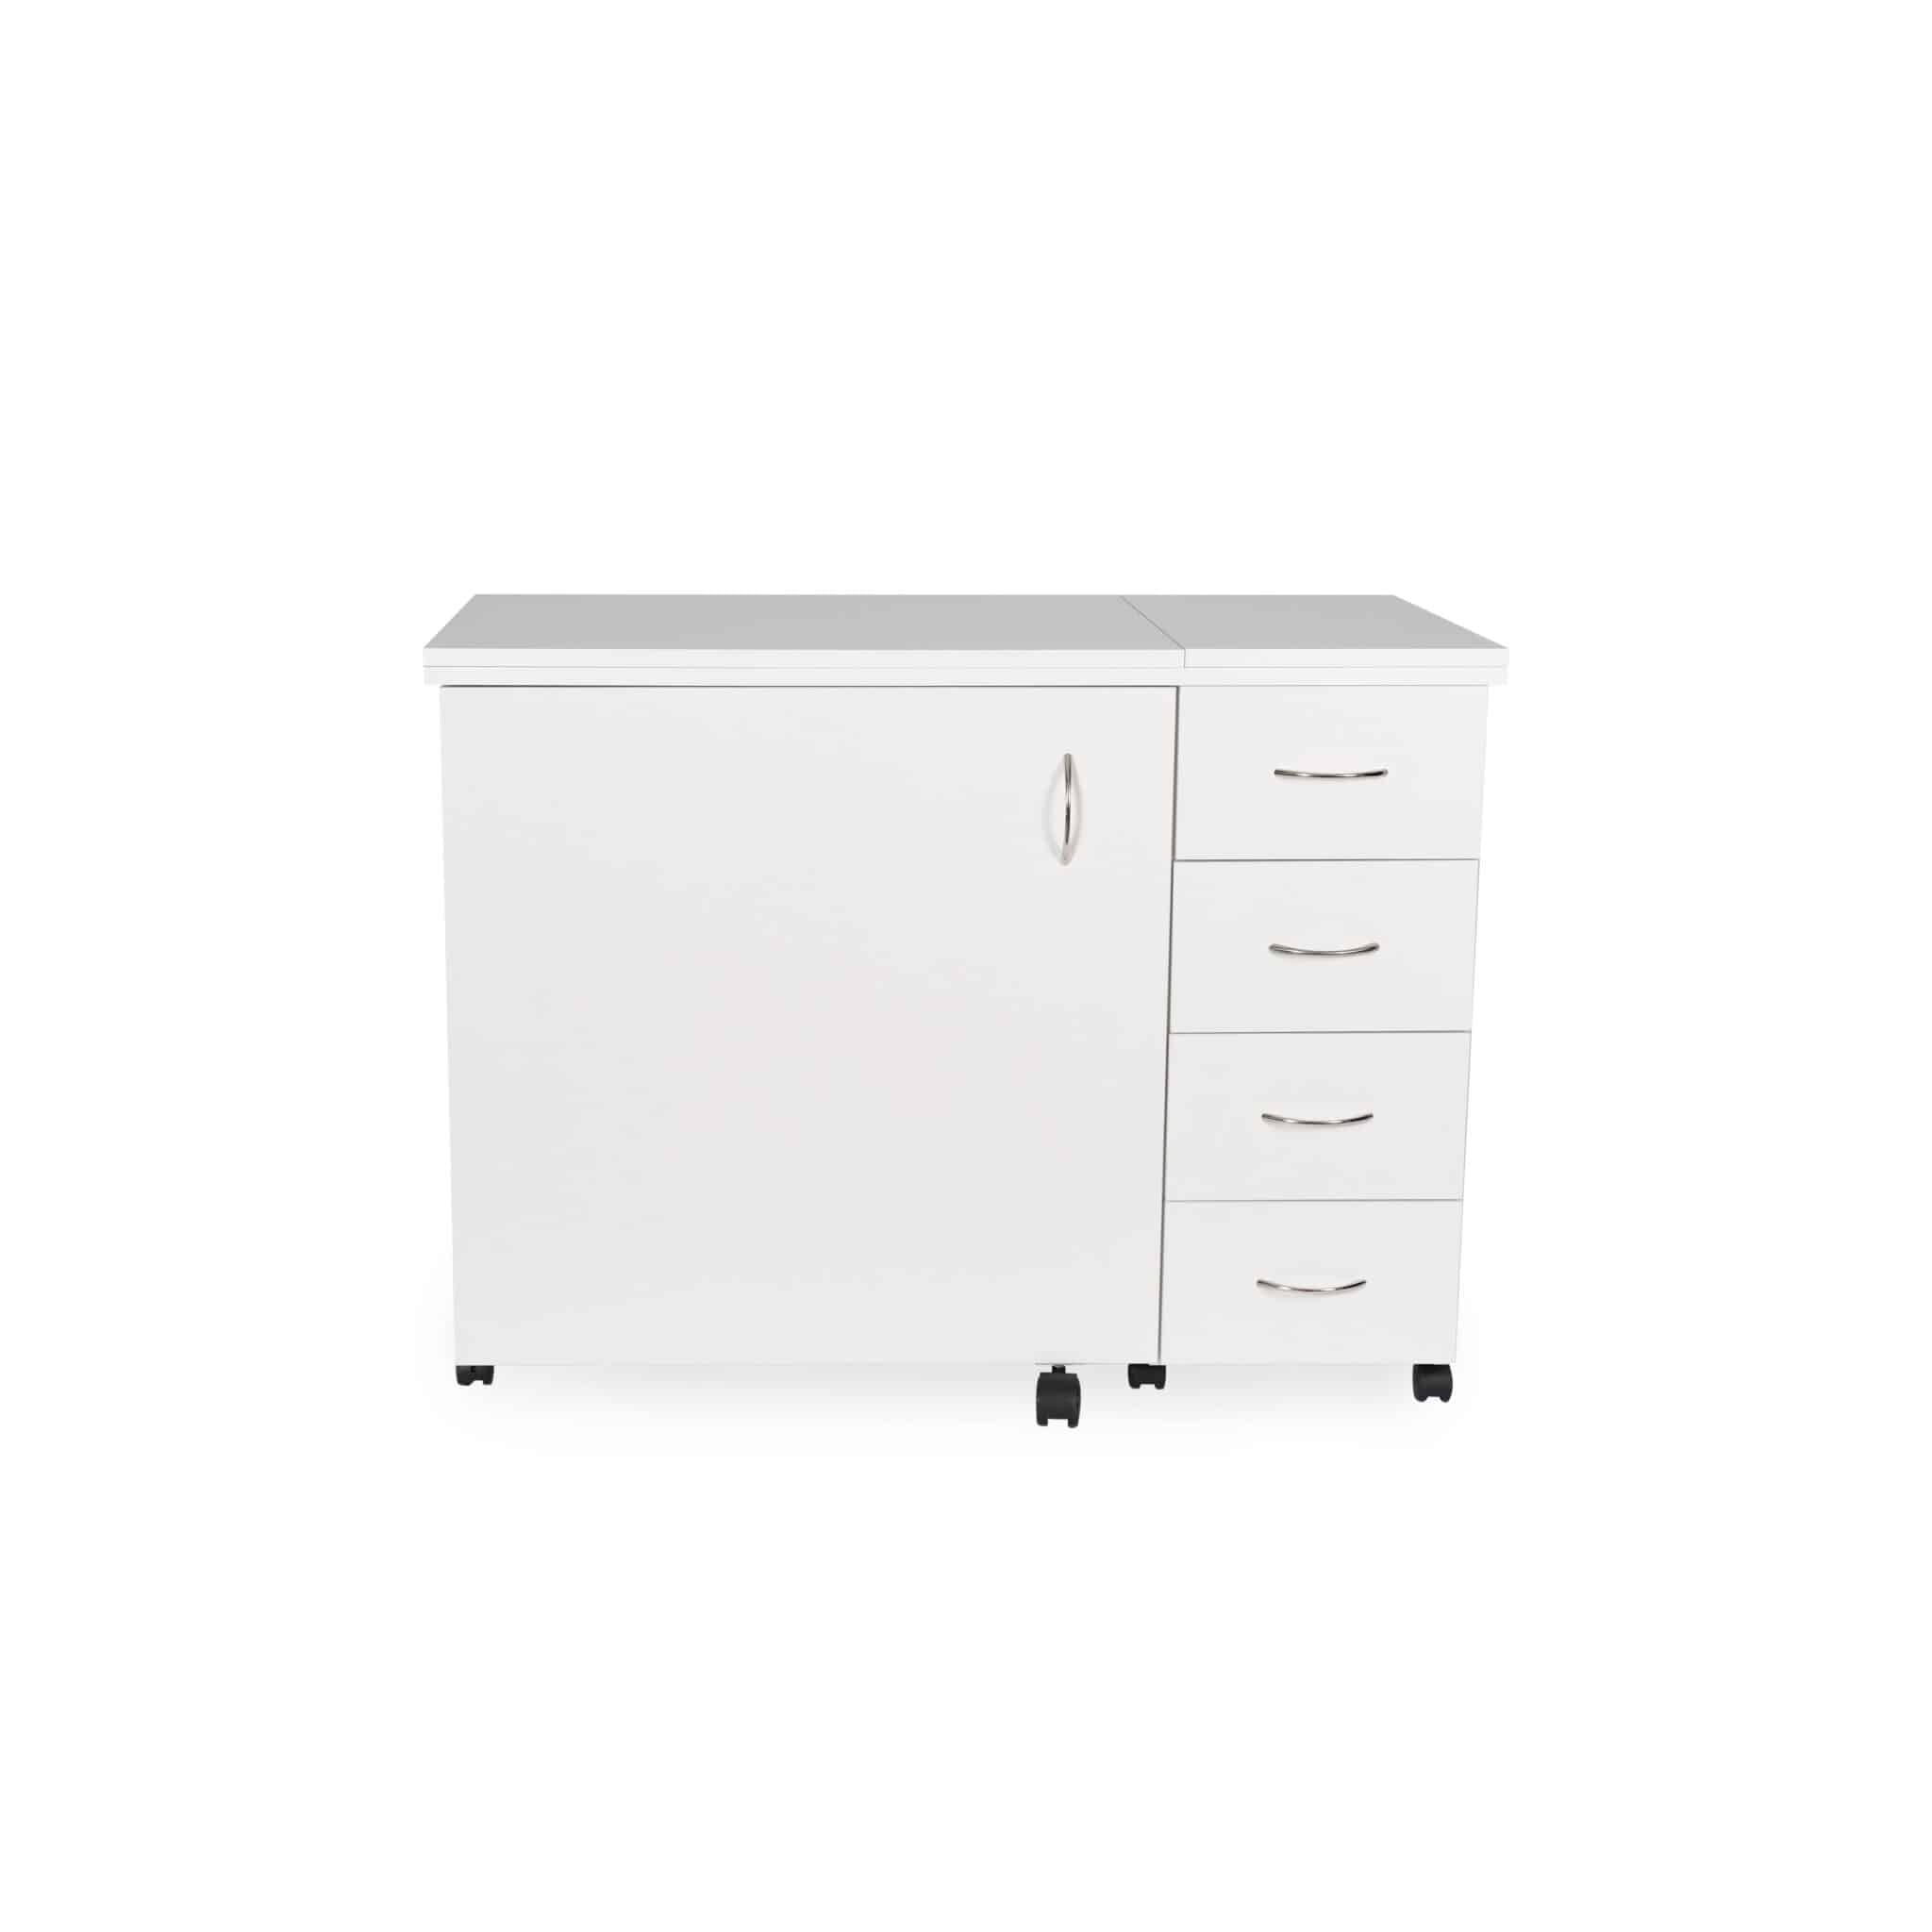 Arrow- Laverne and Shirley Sewing Cabinet White